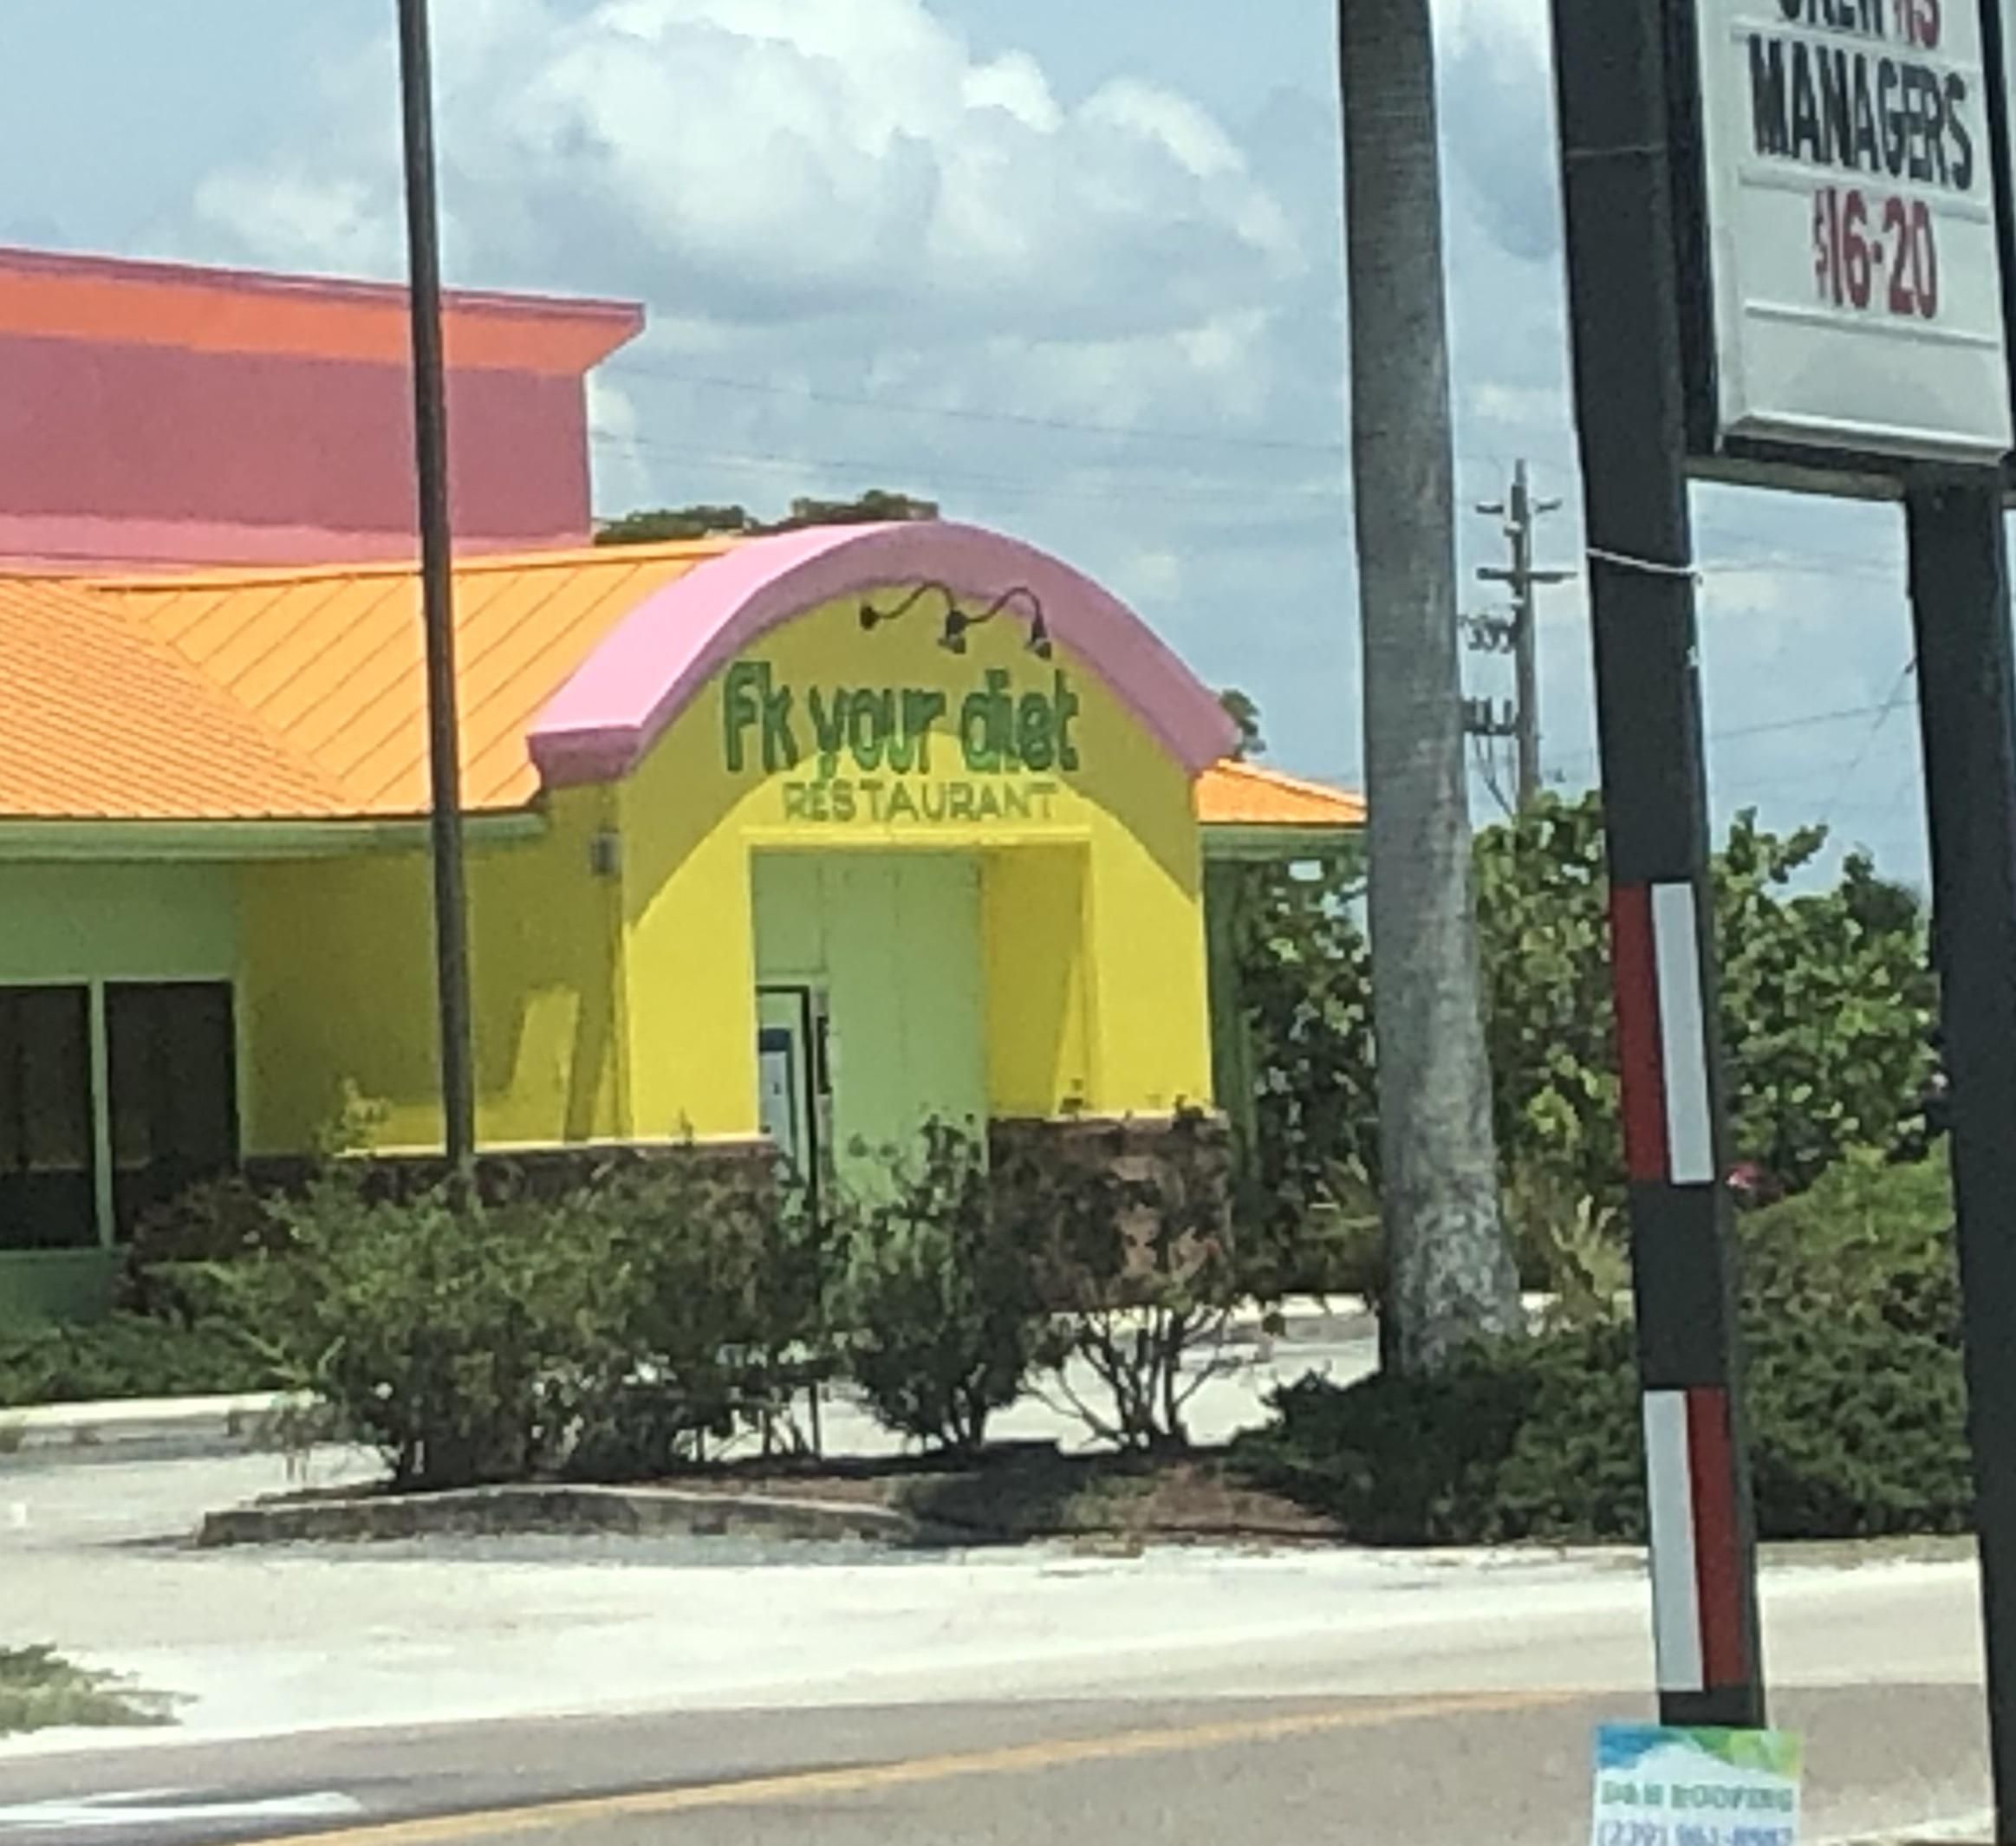 Anyone been to this restaurant chain in Florida?